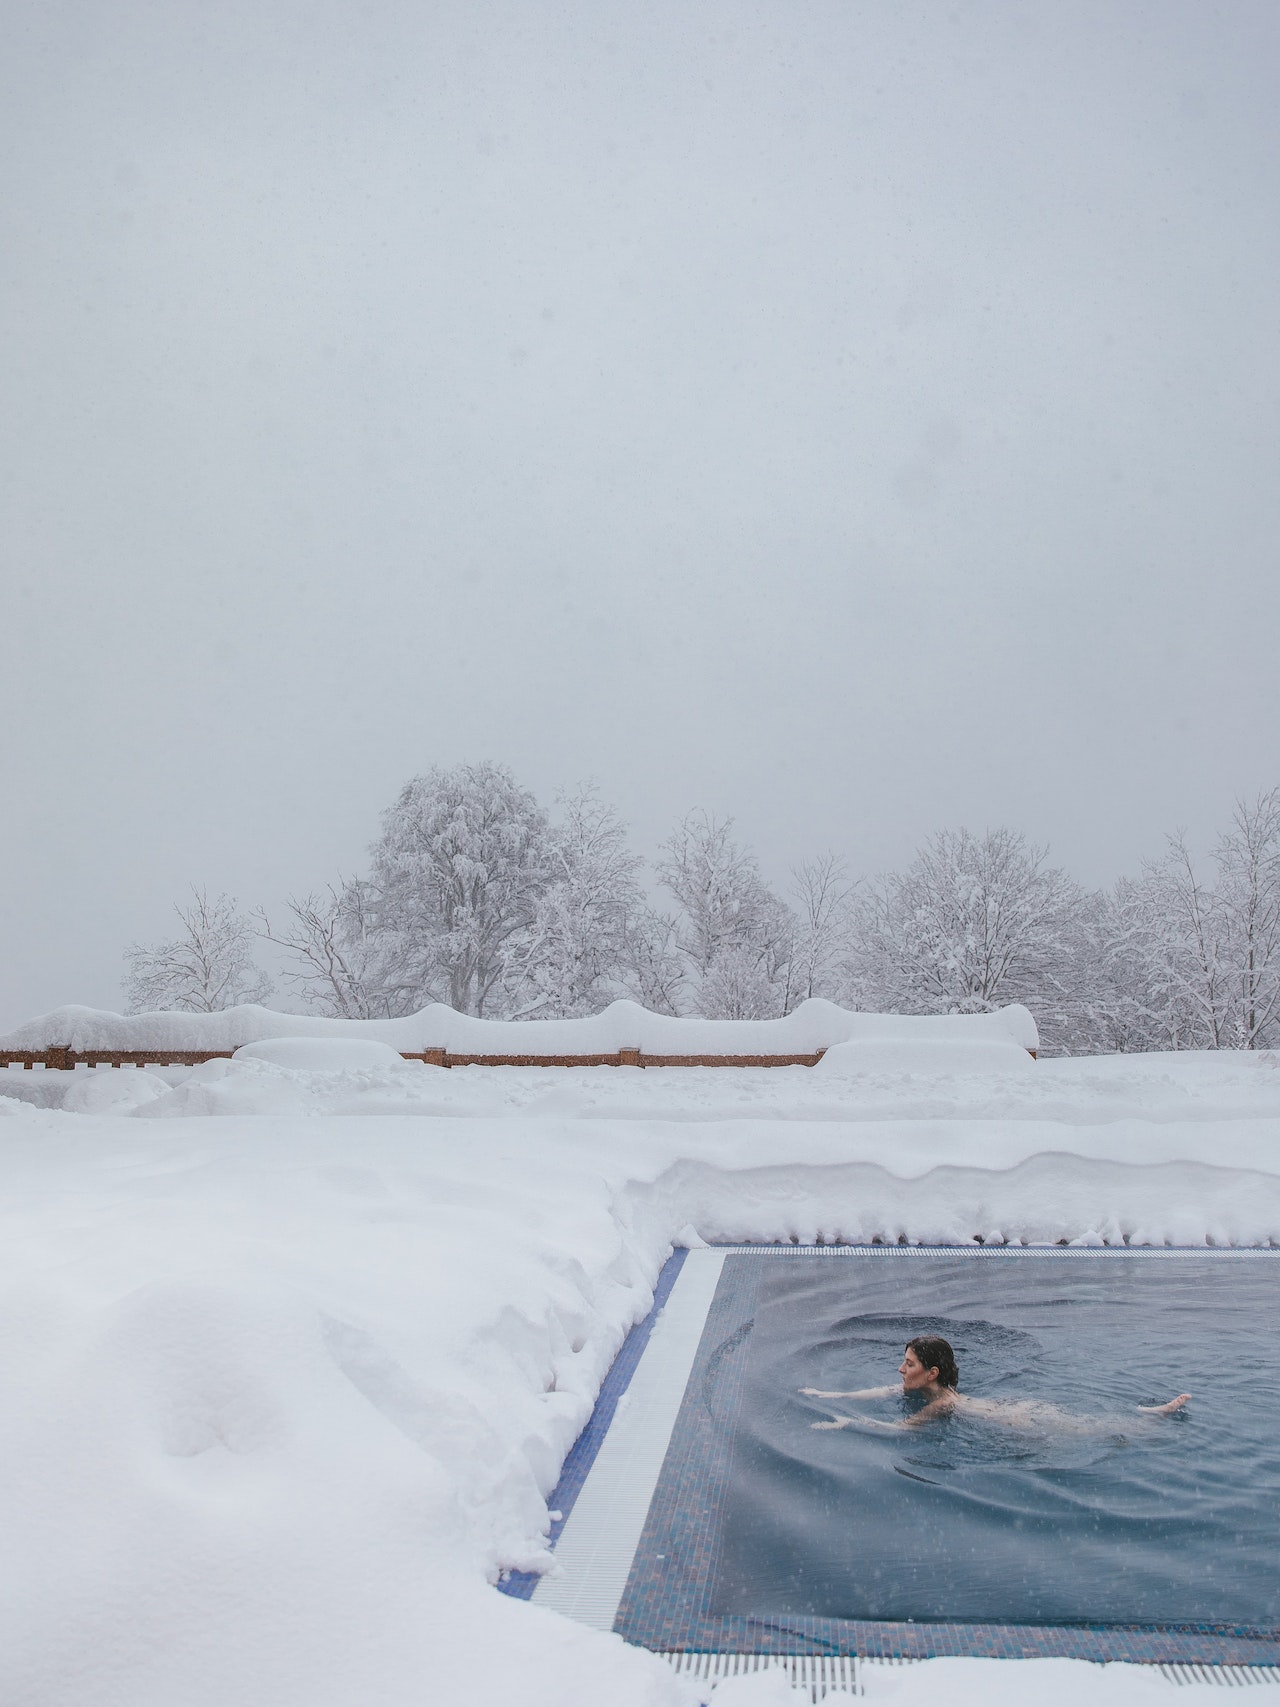 Fun Ideas for the Winter While the Pool is Closed